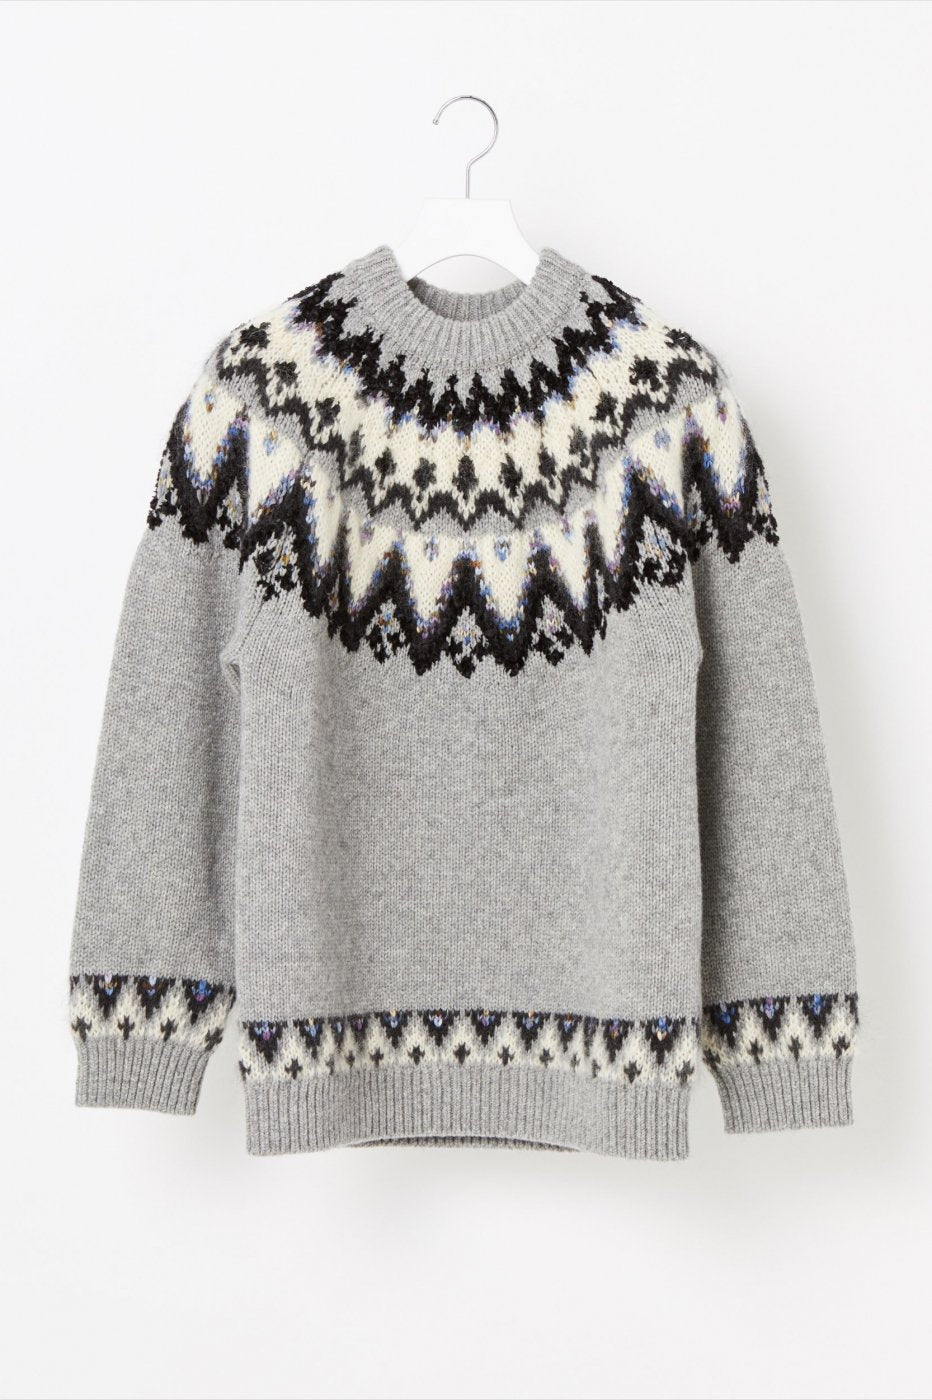 COOHEM "NORDIC KNIT SWEATER / GREY"